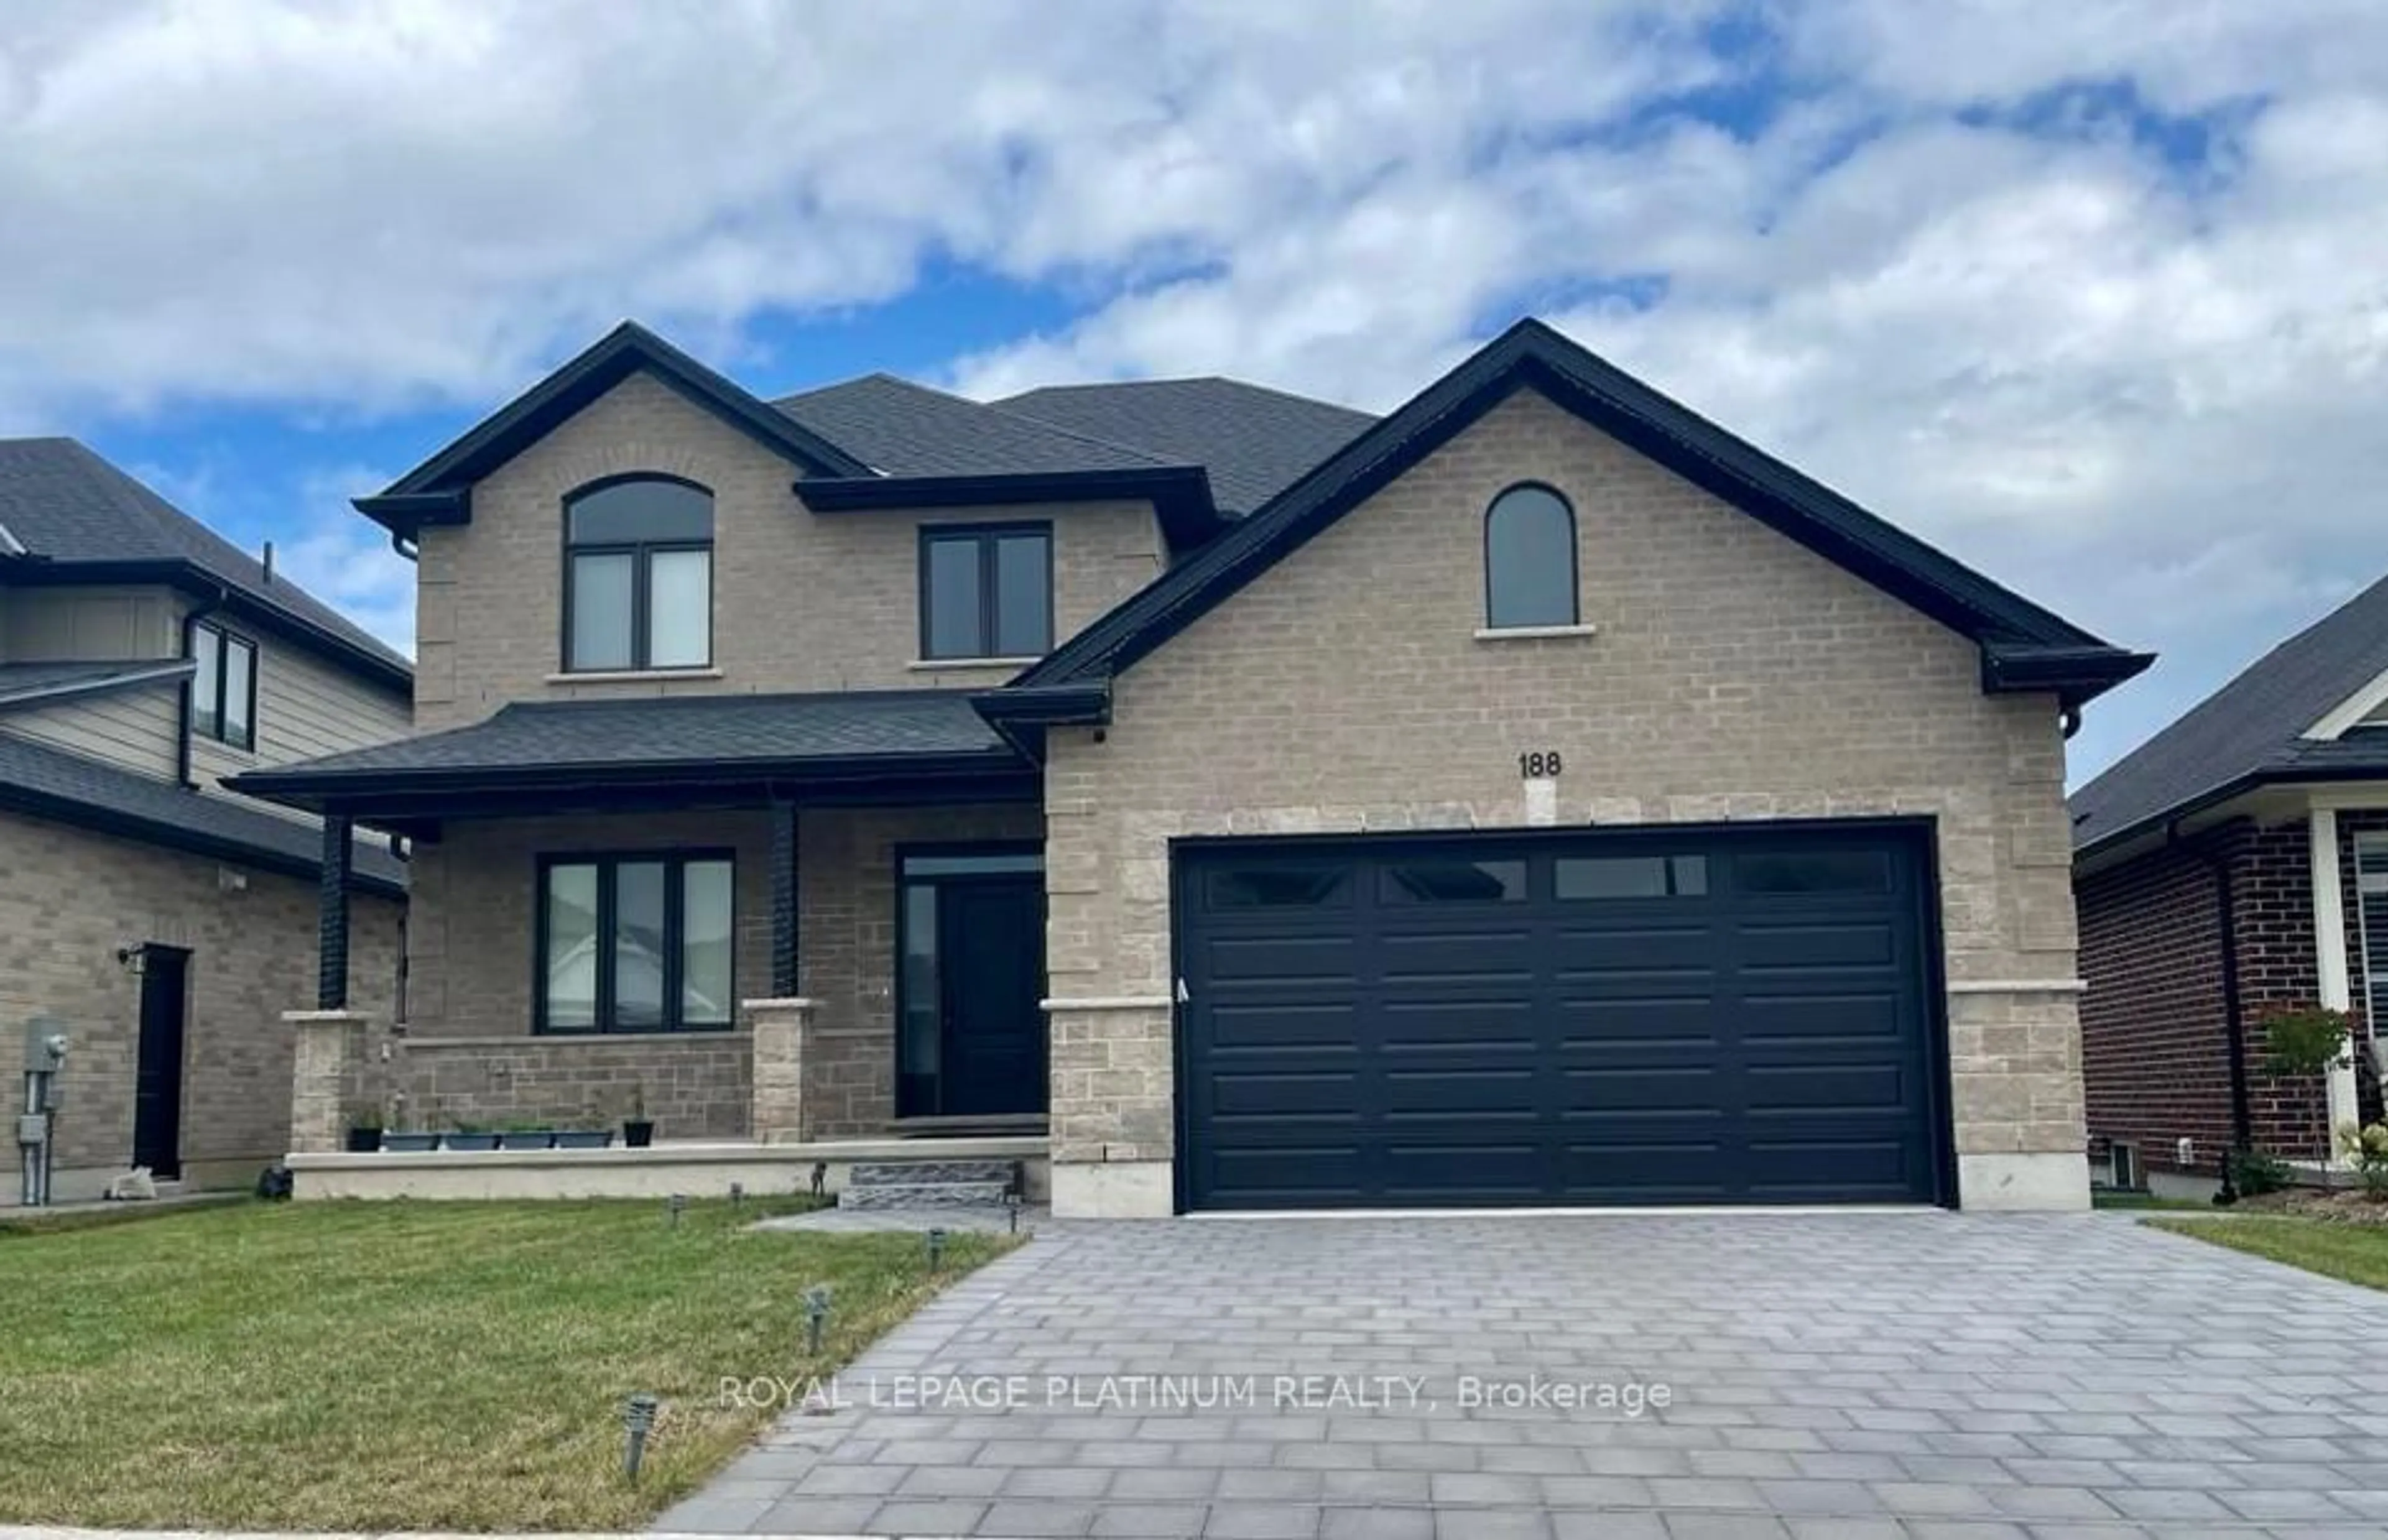 Home with brick exterior material for 188 Boardwalk Way, Thames Centre Ontario N0L 1G5